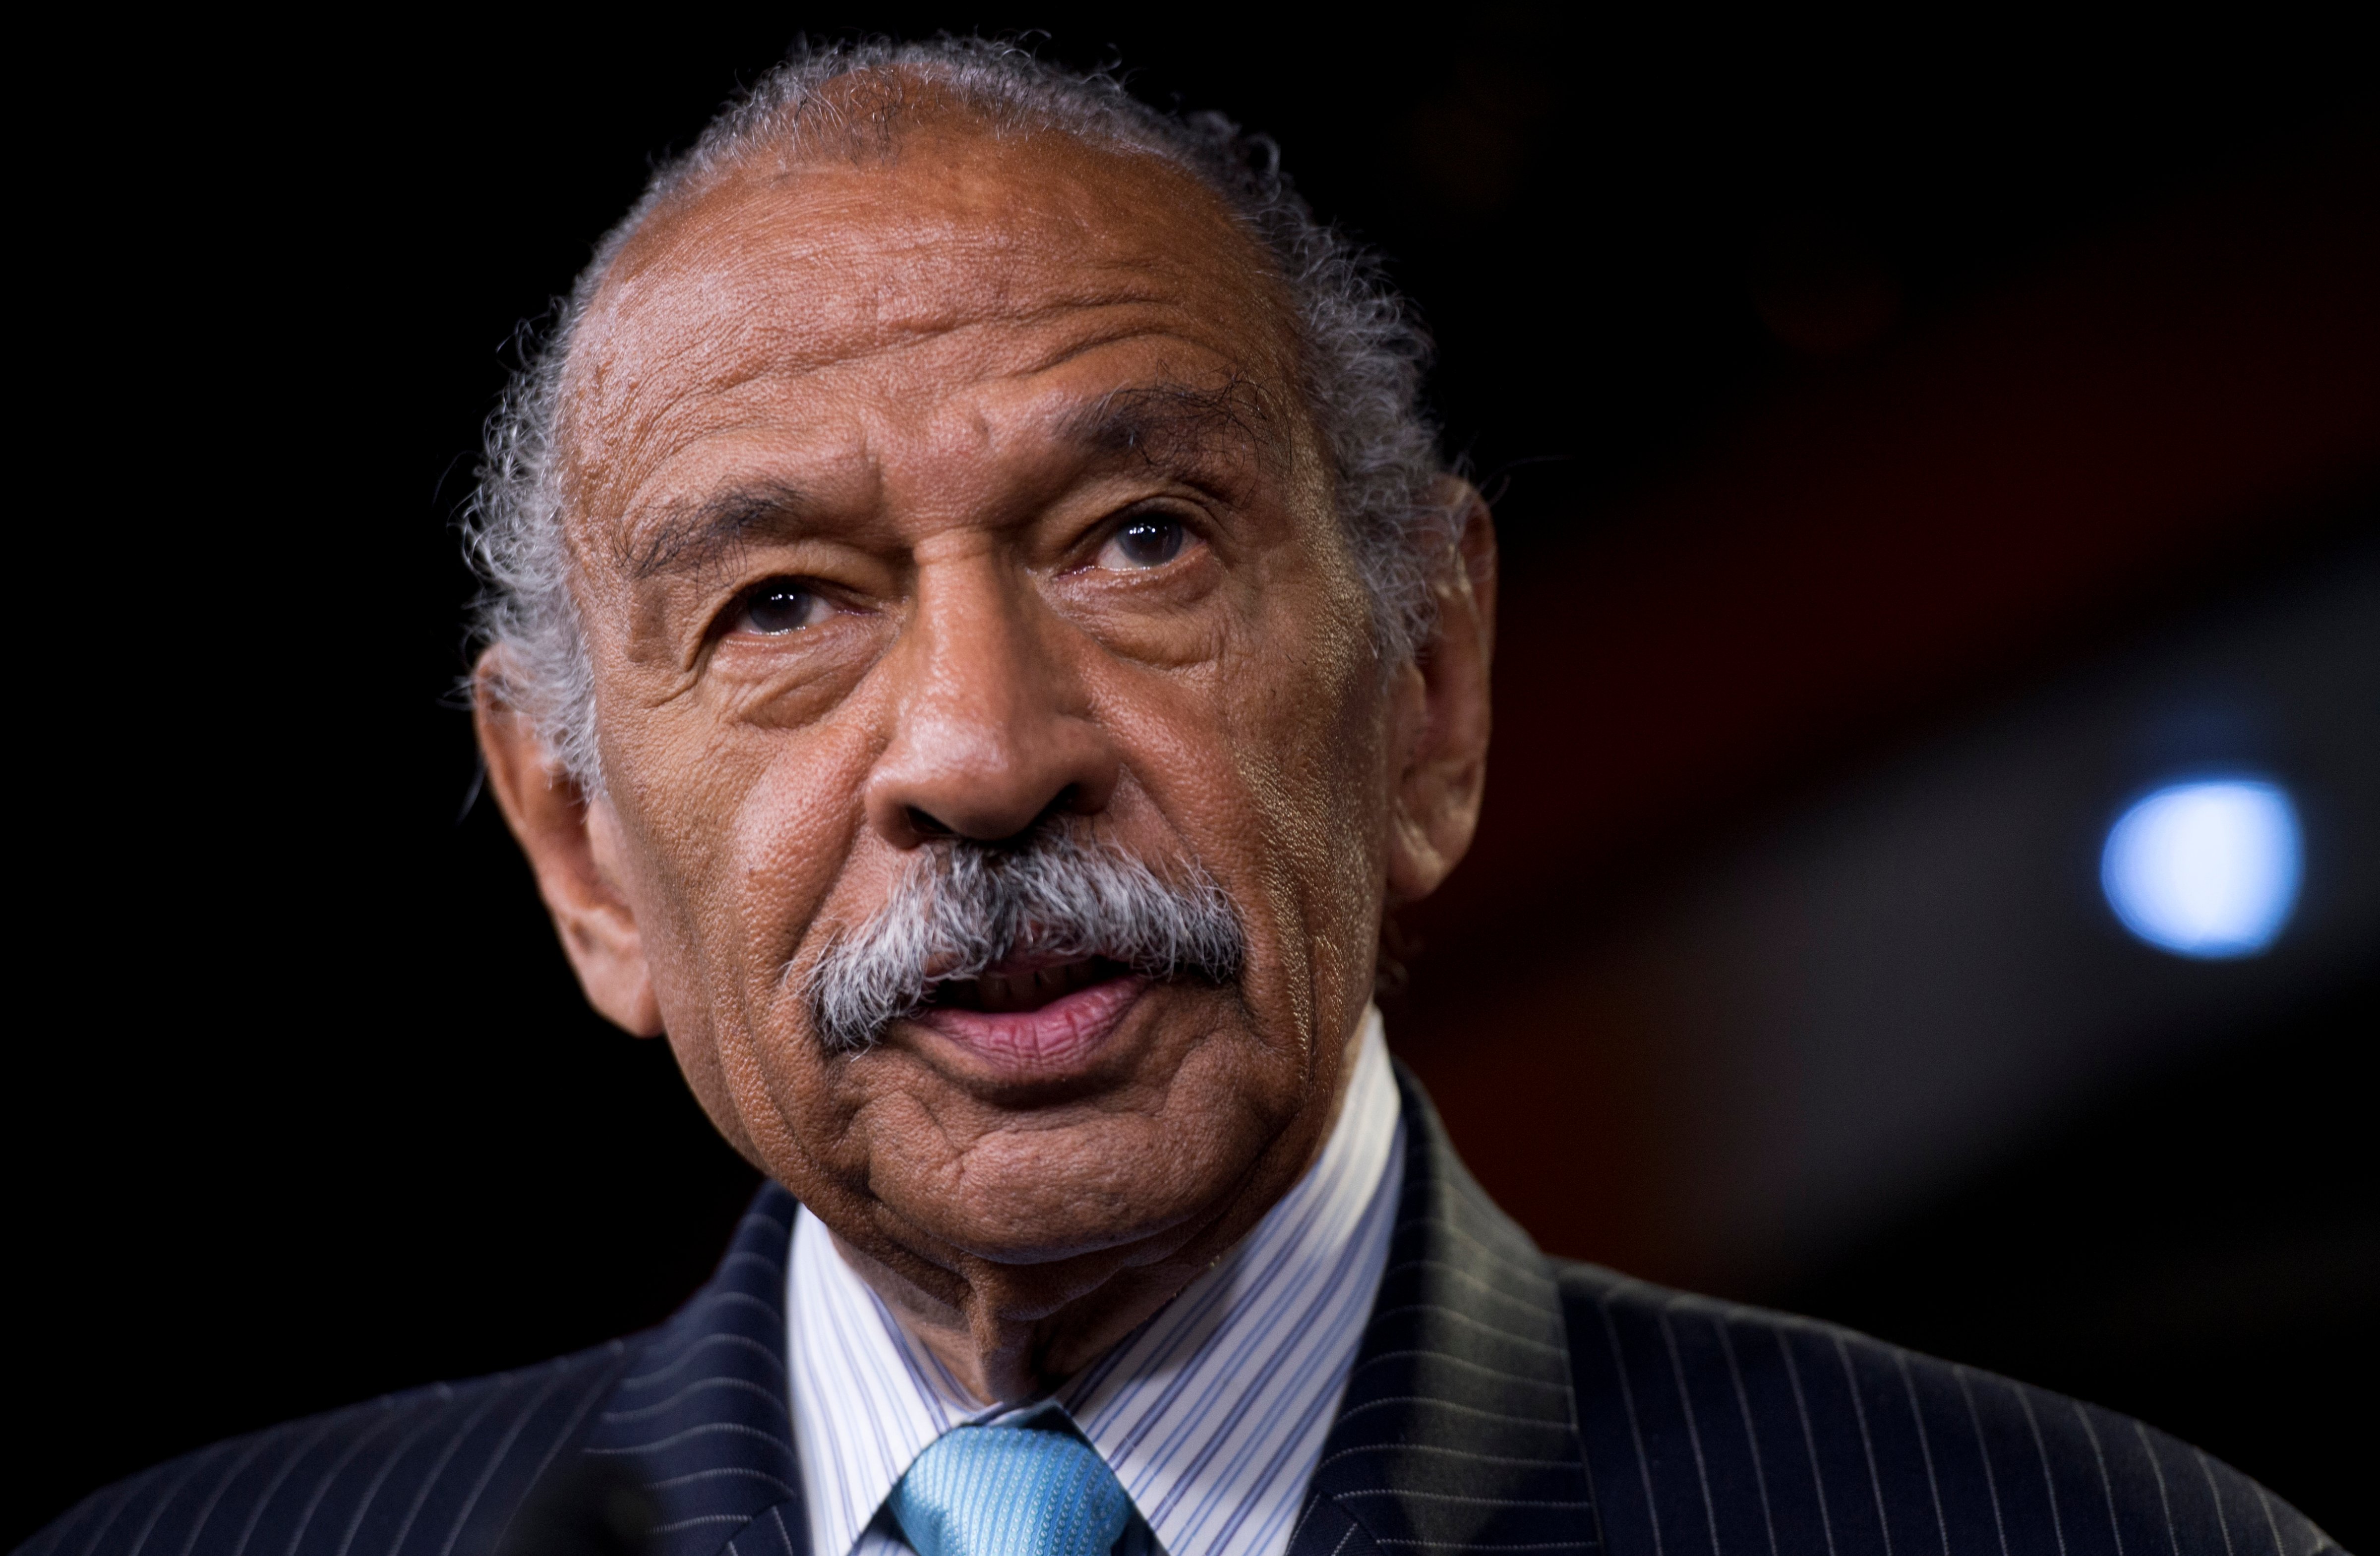 Rep. John Conyers, D-Mich., speaks during a Congressional Progressive Caucus news conference in the Capitol Visitor Center to introduce the Deal for All resolution. (Tom Williams—CQ-Roll Call/Getty Images)